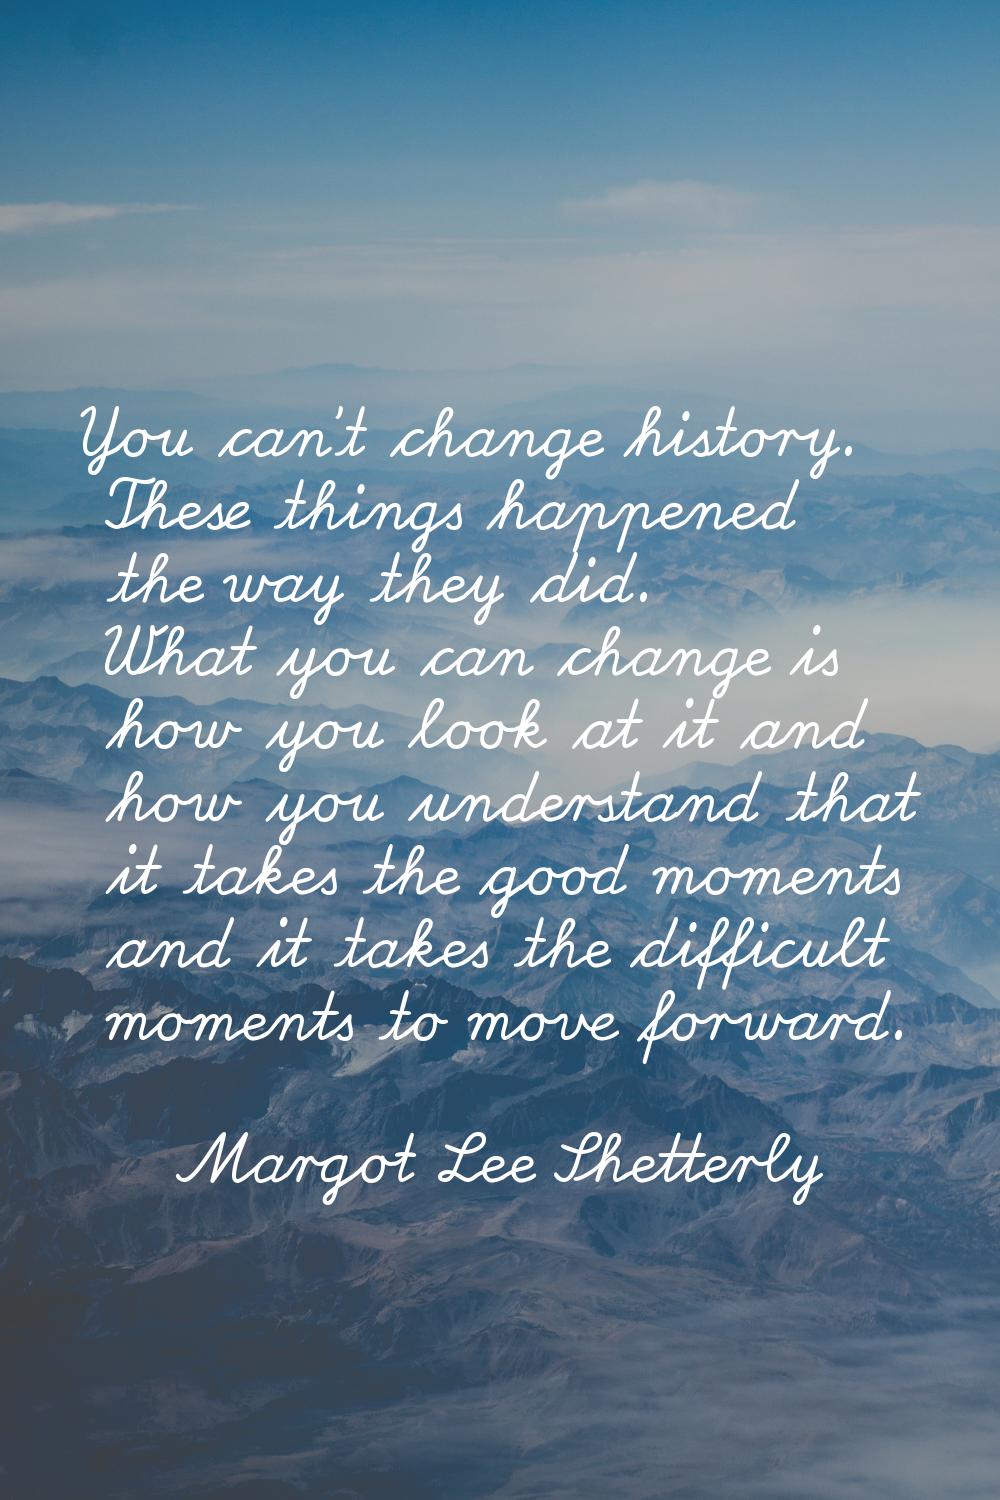 You can't change history. These things happened the way they did. What you can change is how you lo